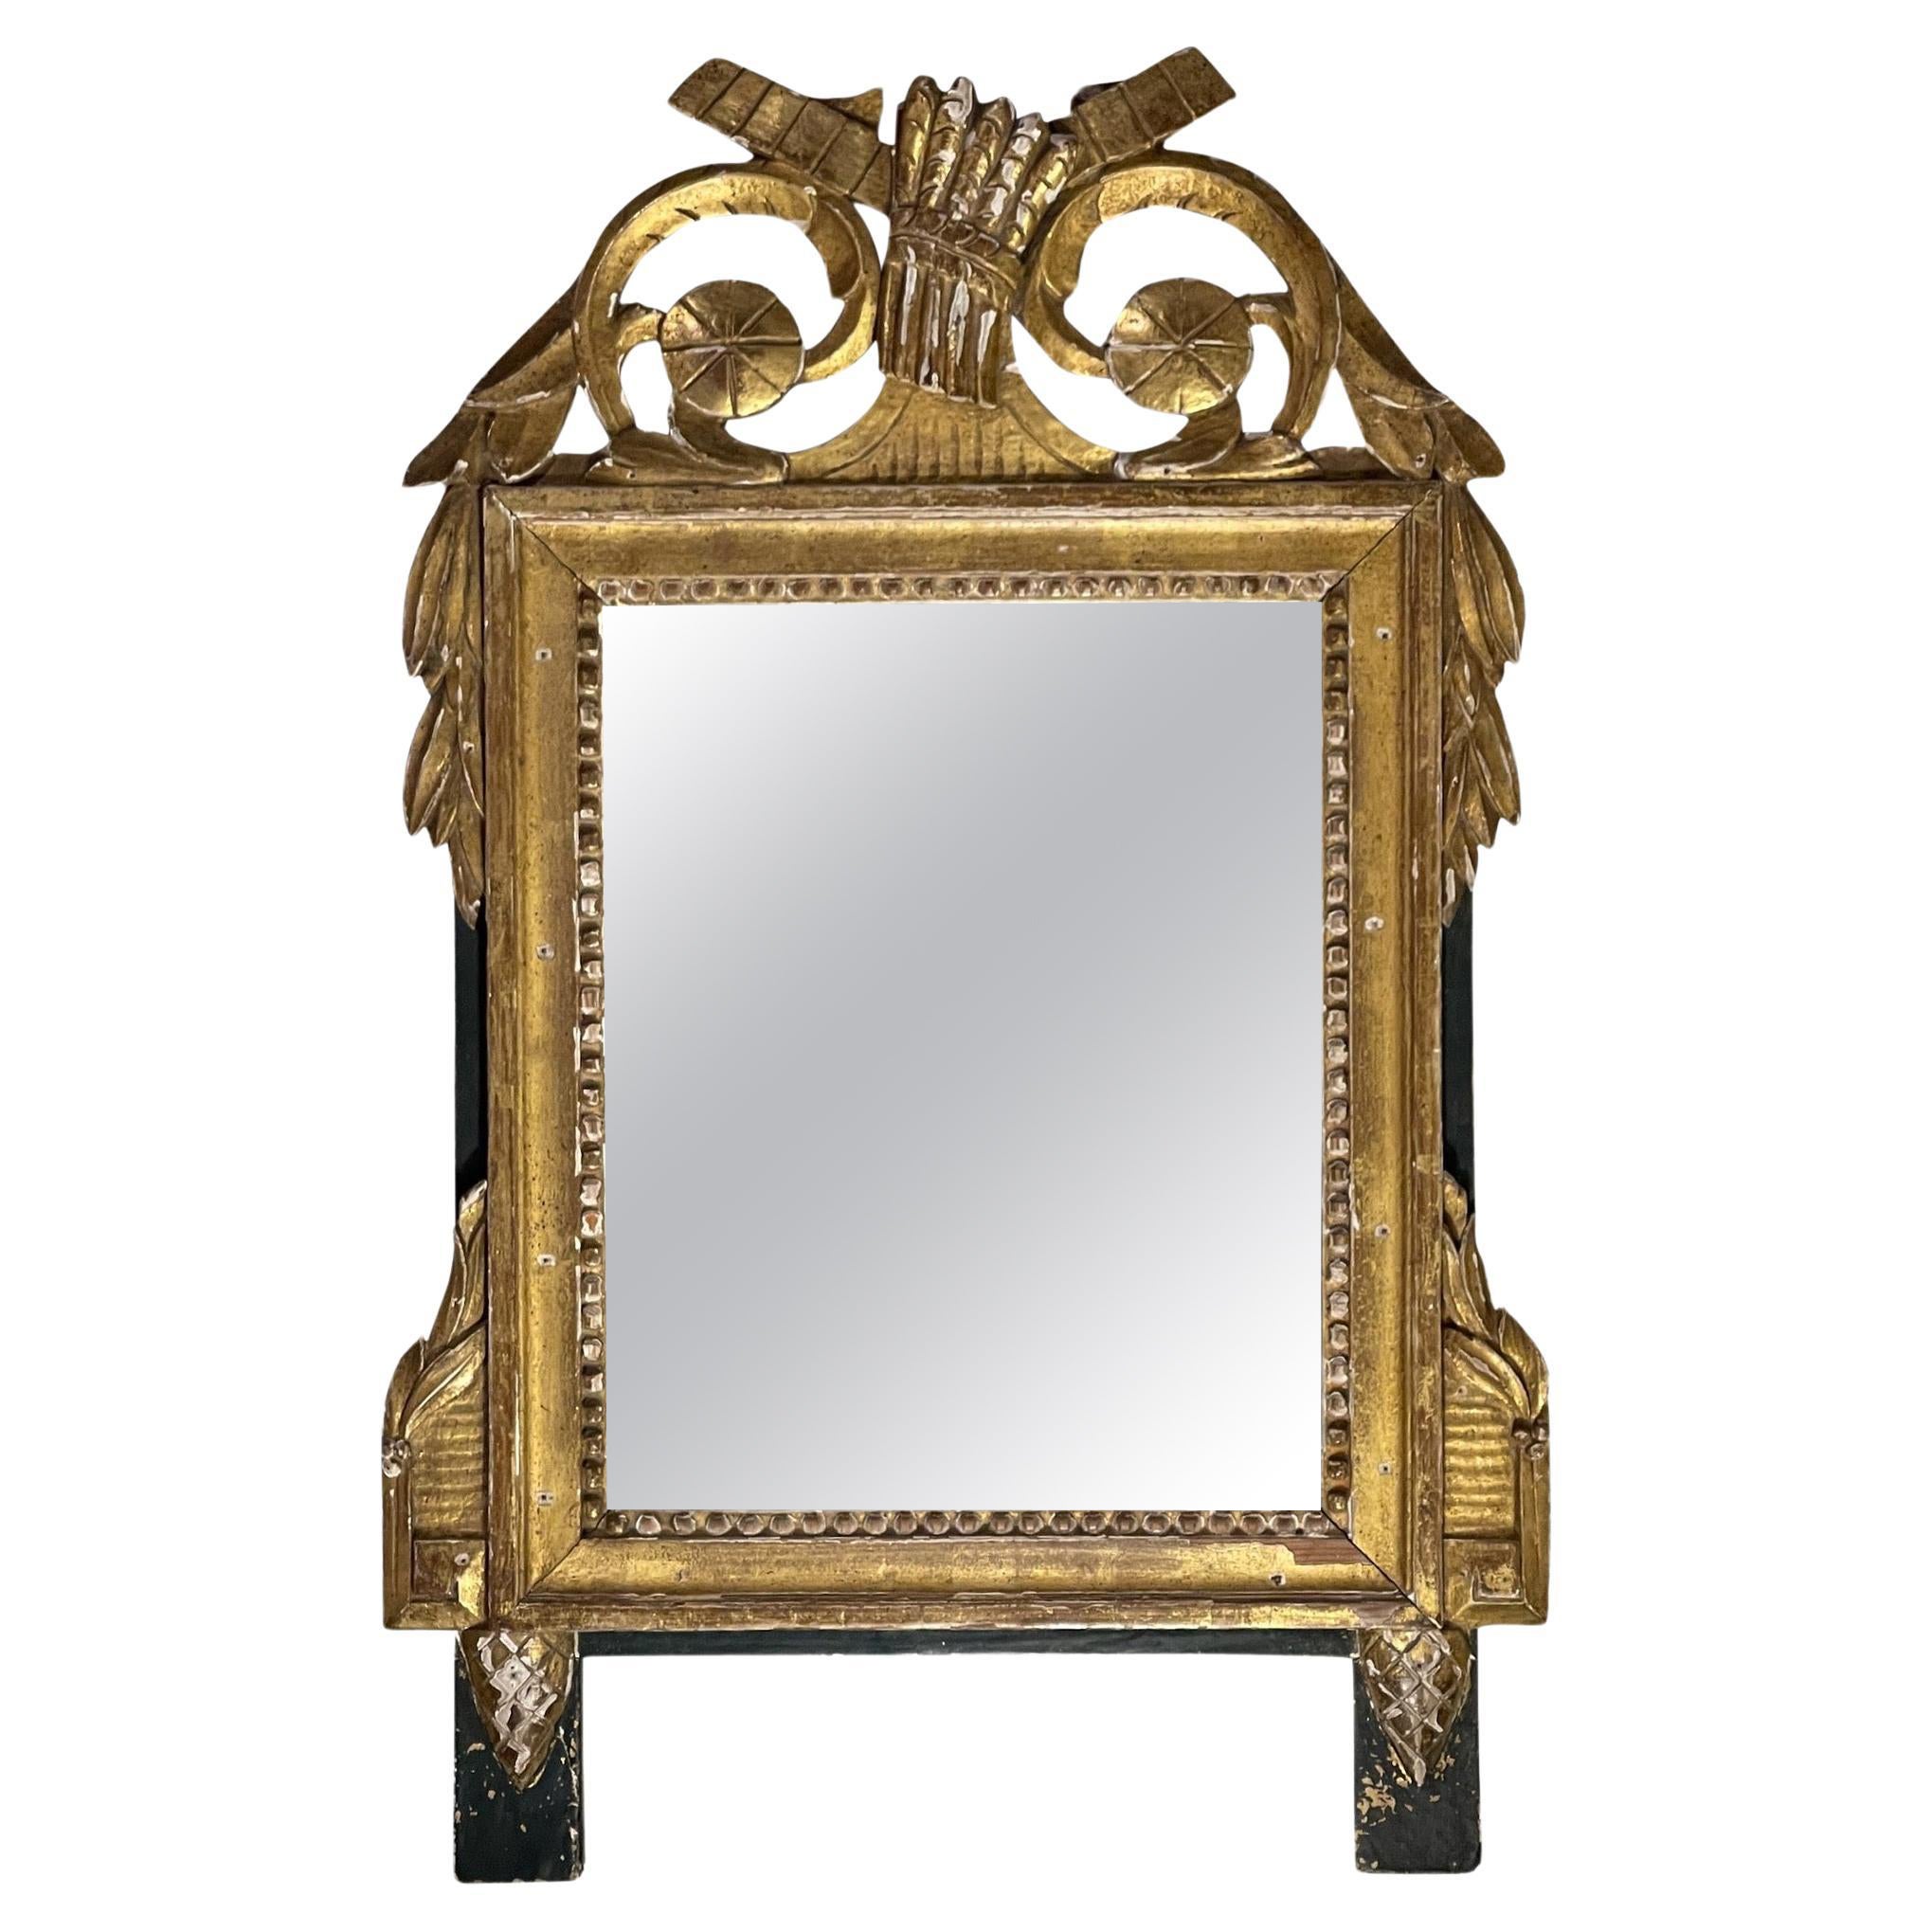 Early 19th Century Giltwood Mirror